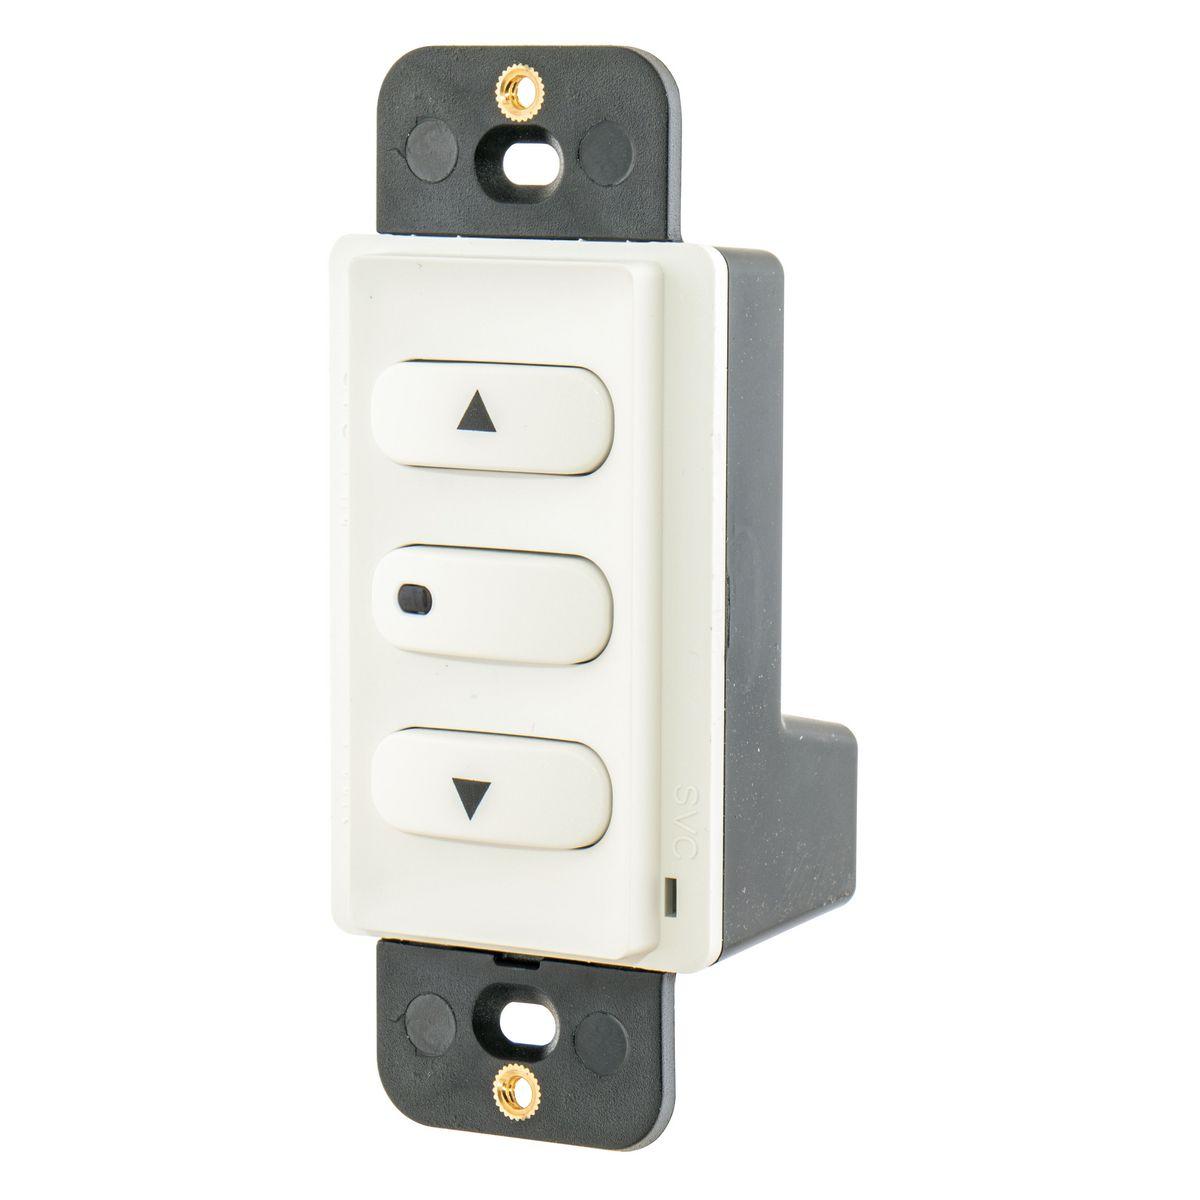 Hubbell DSM010W Switches and Lighting Control, DimmingSwitch, Low Voltage, Momentary, 0-10V DC, White 